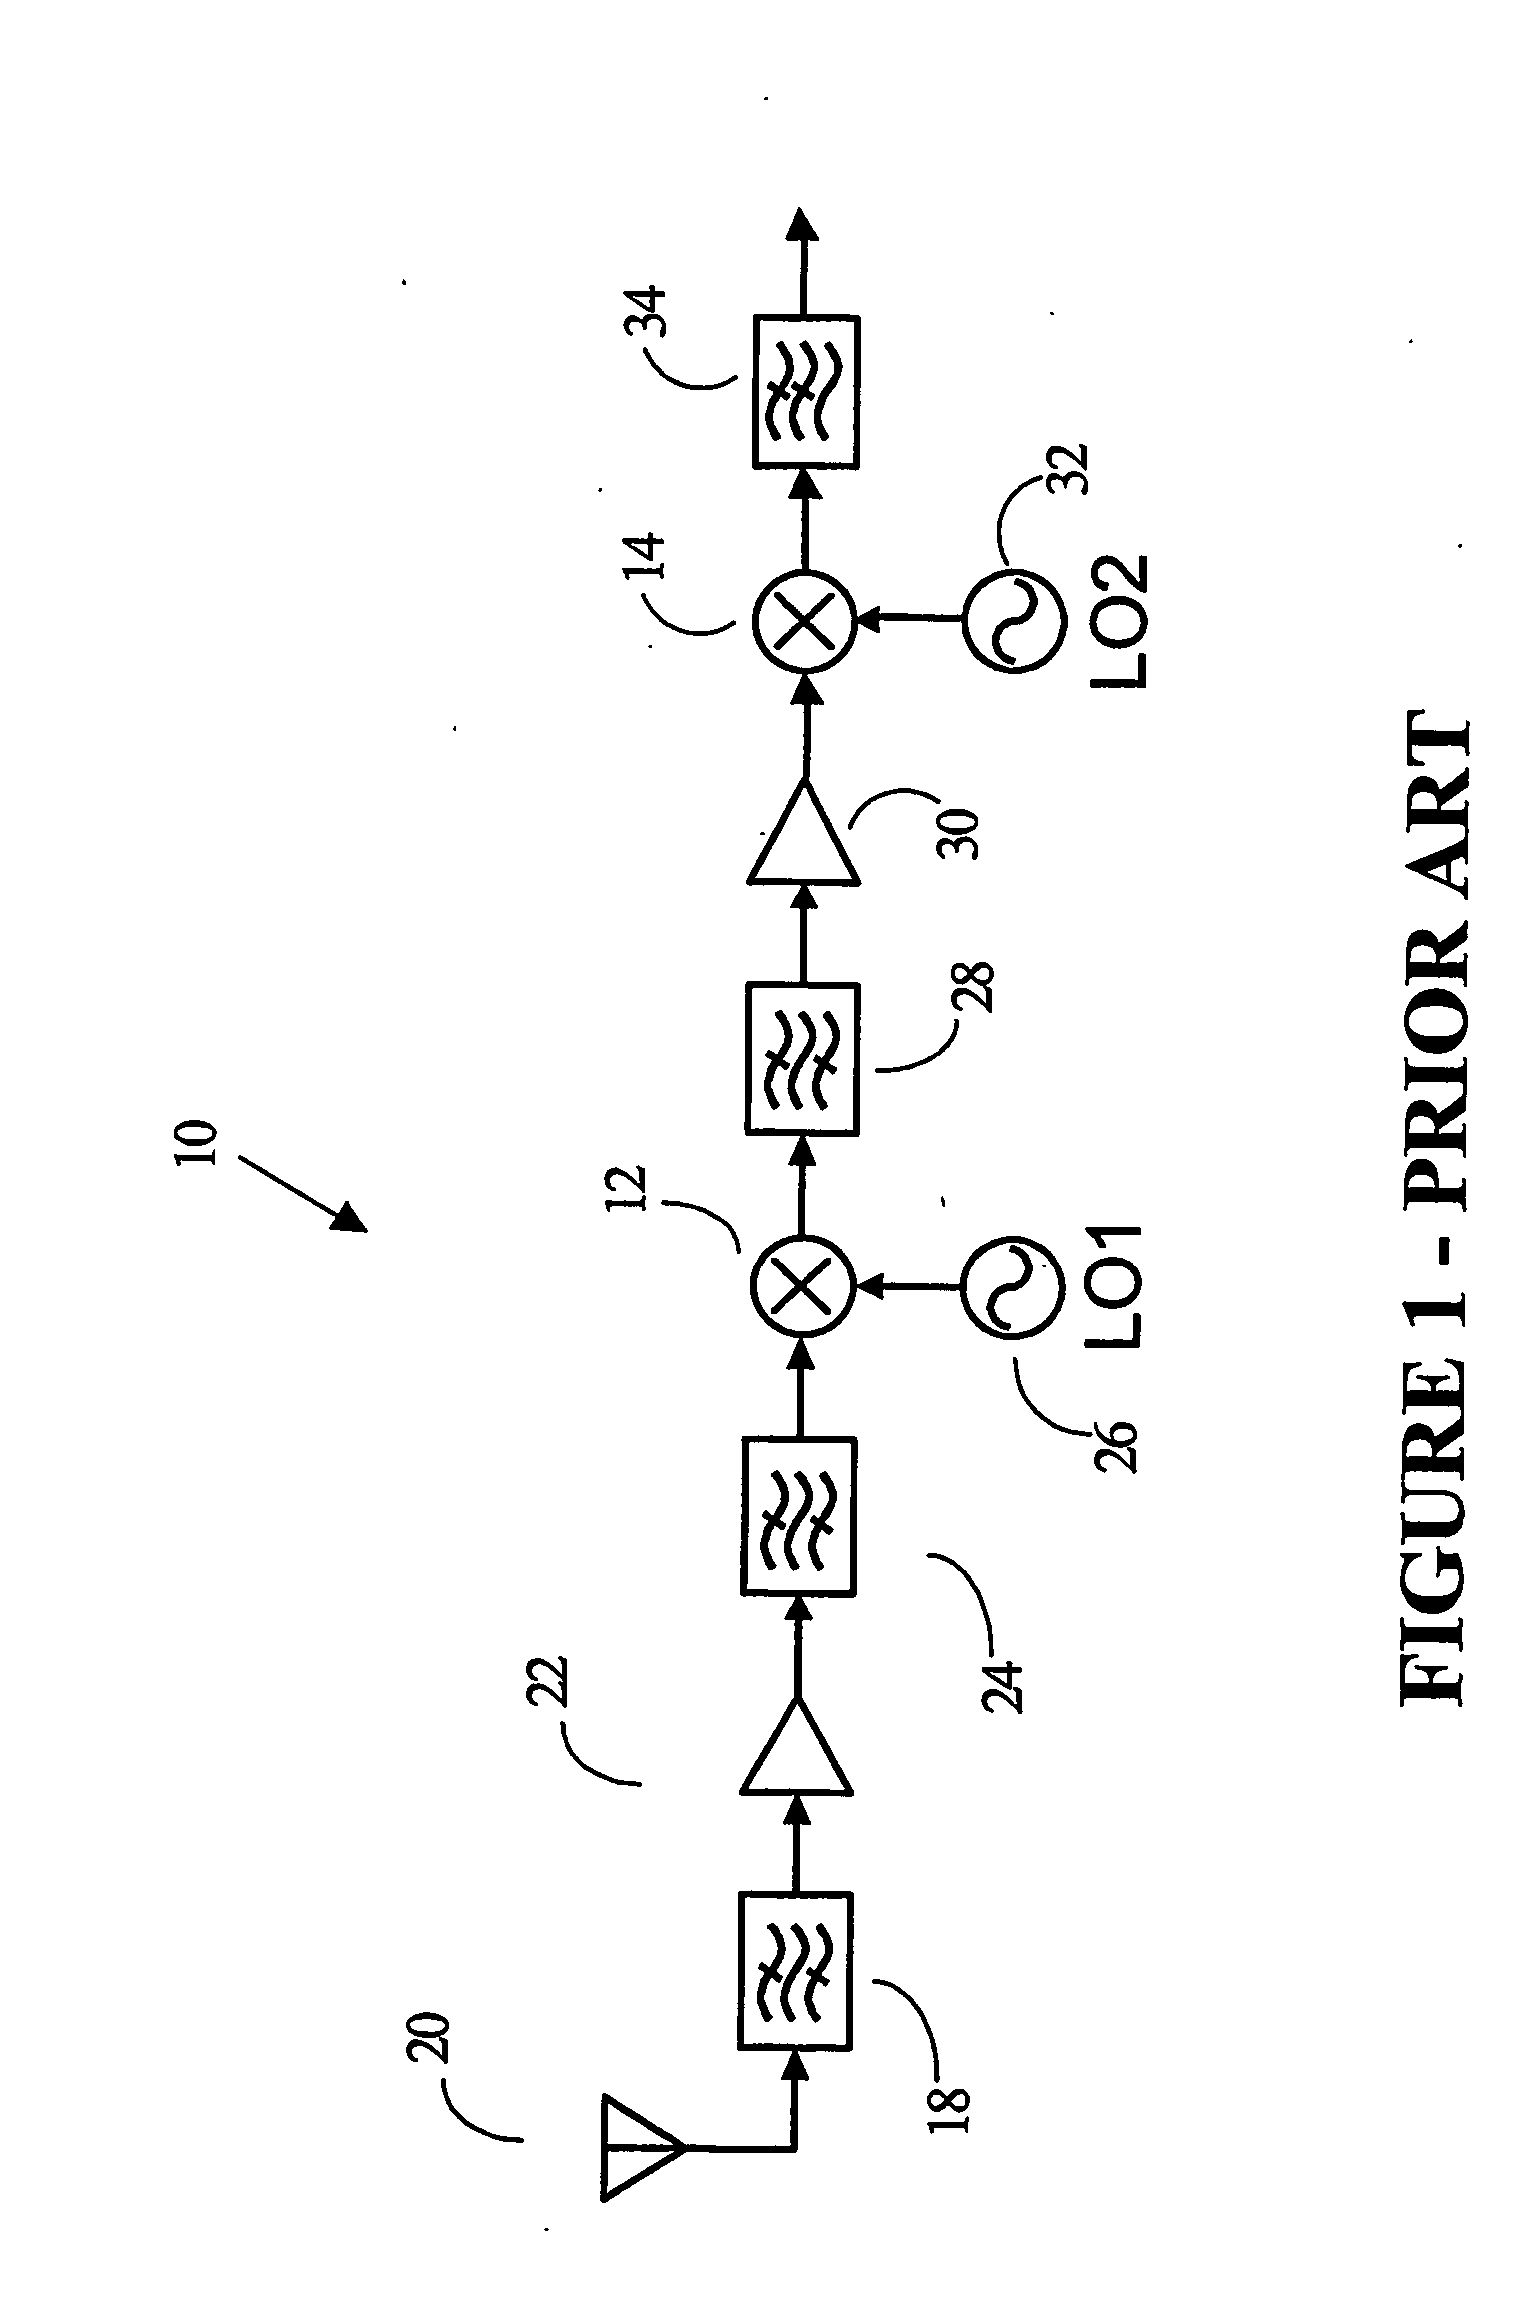 Regenerative divider for up and down conversion of radio frequency (rf) signals